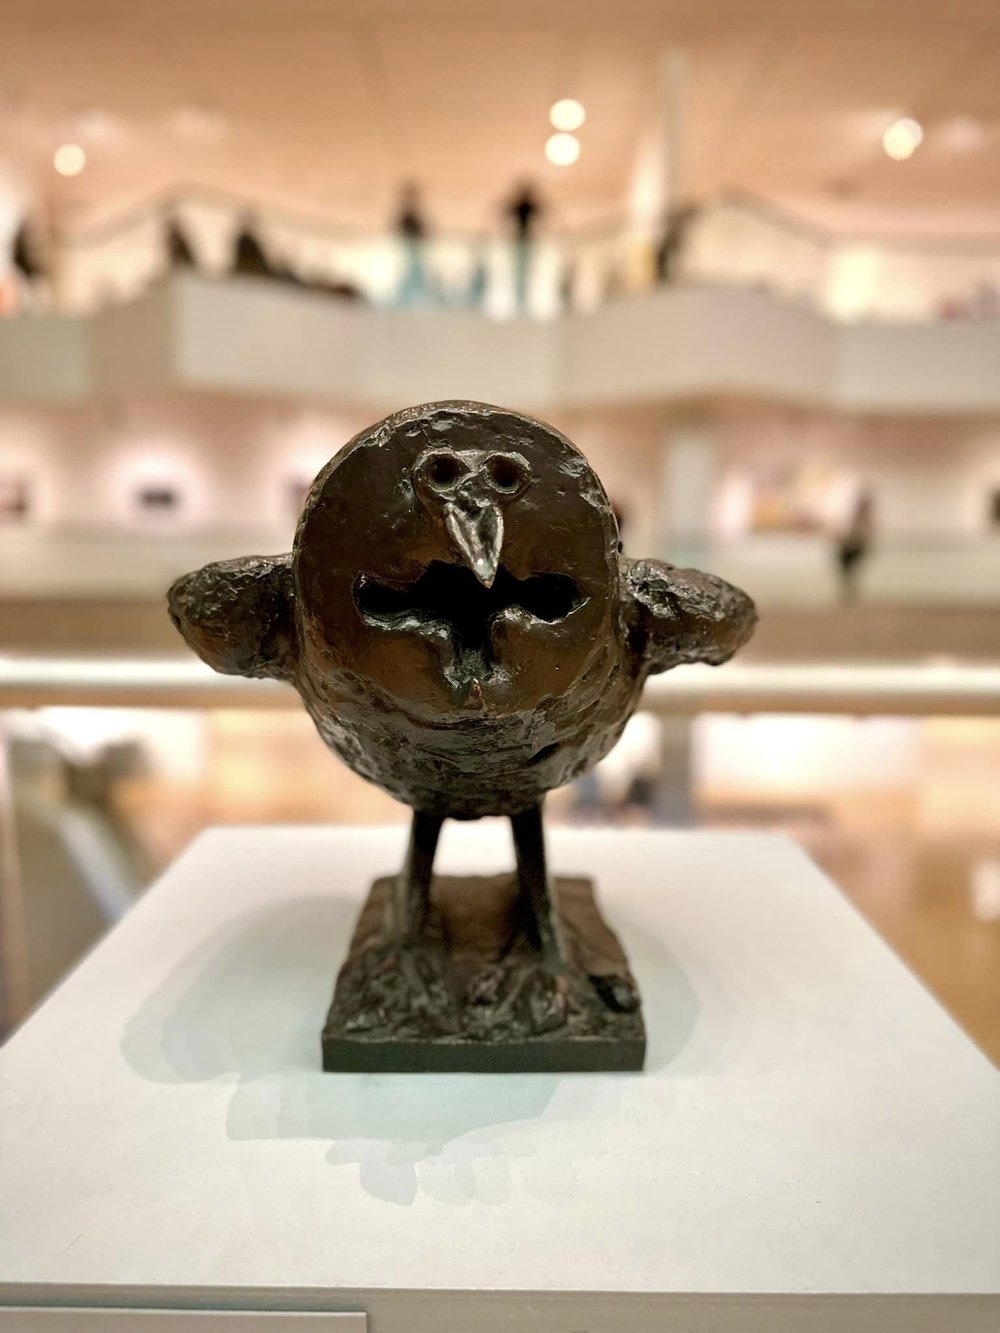  “Angry Owl,” bronze sculpture by Pablo Picasso. Palm Springs Art Museum. 